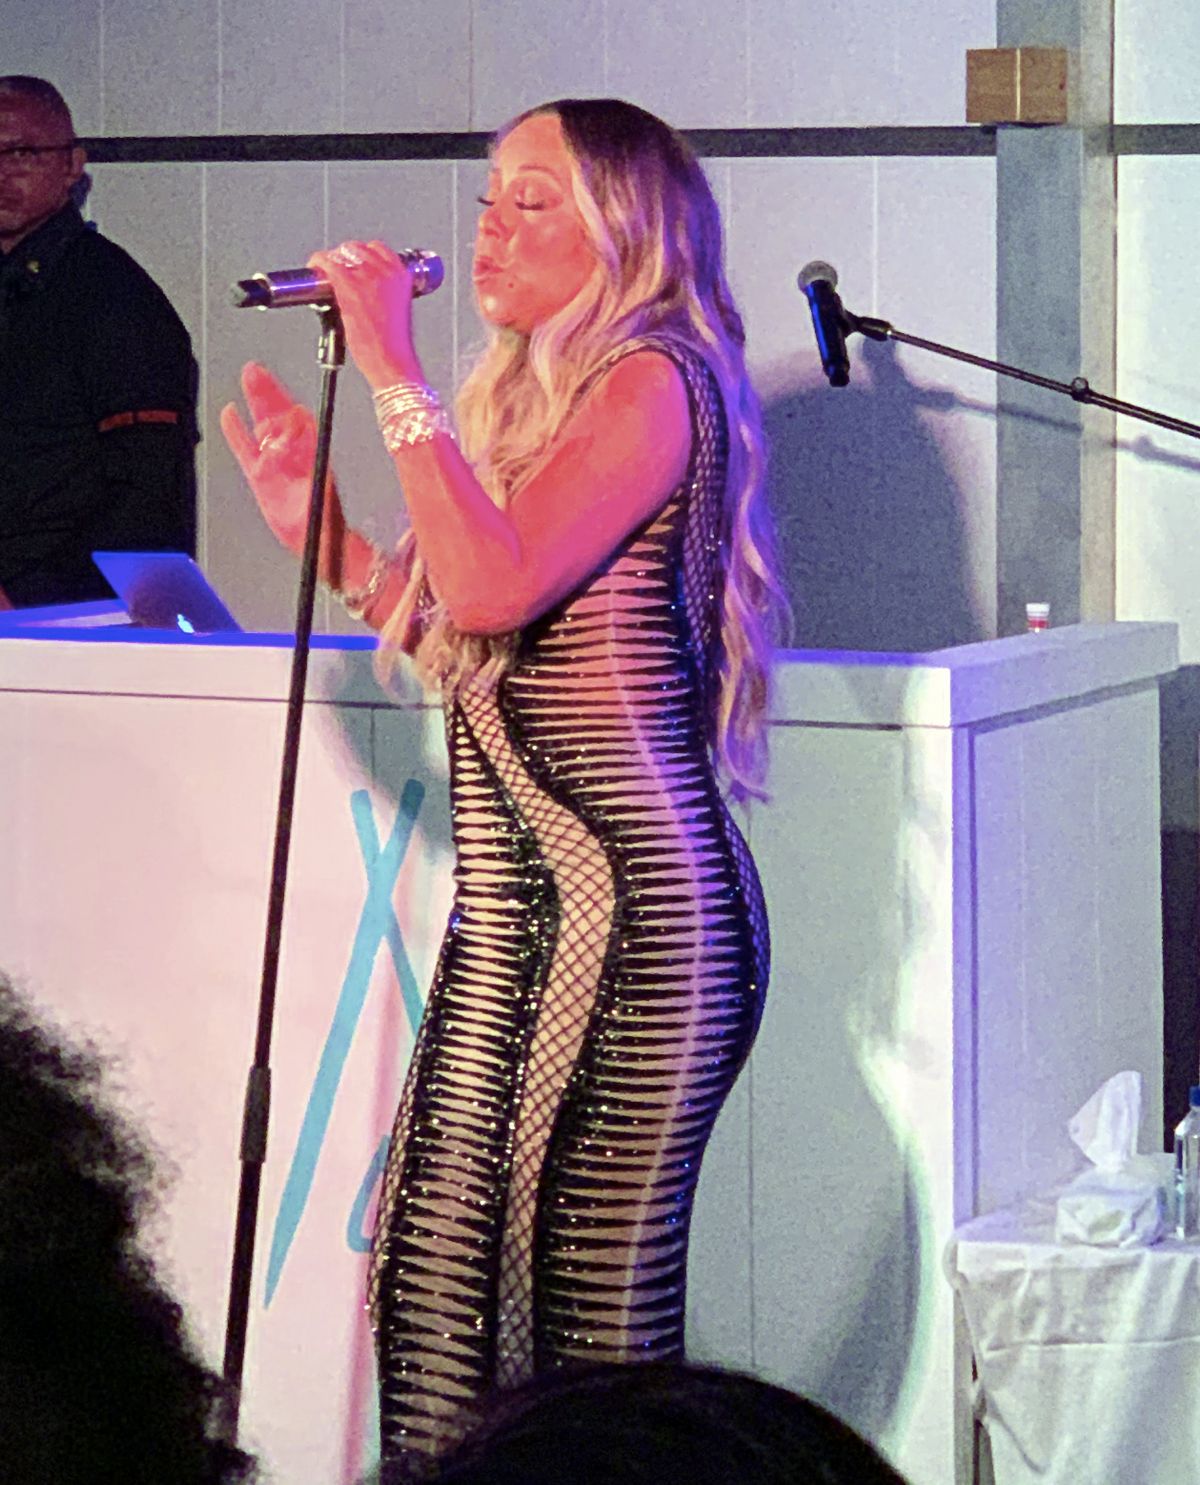 mariah-carey-performs-at-new-year-s-eve-party-at-nikki-beach-in-saint-barthelemy-12-31-2018-5.jpg